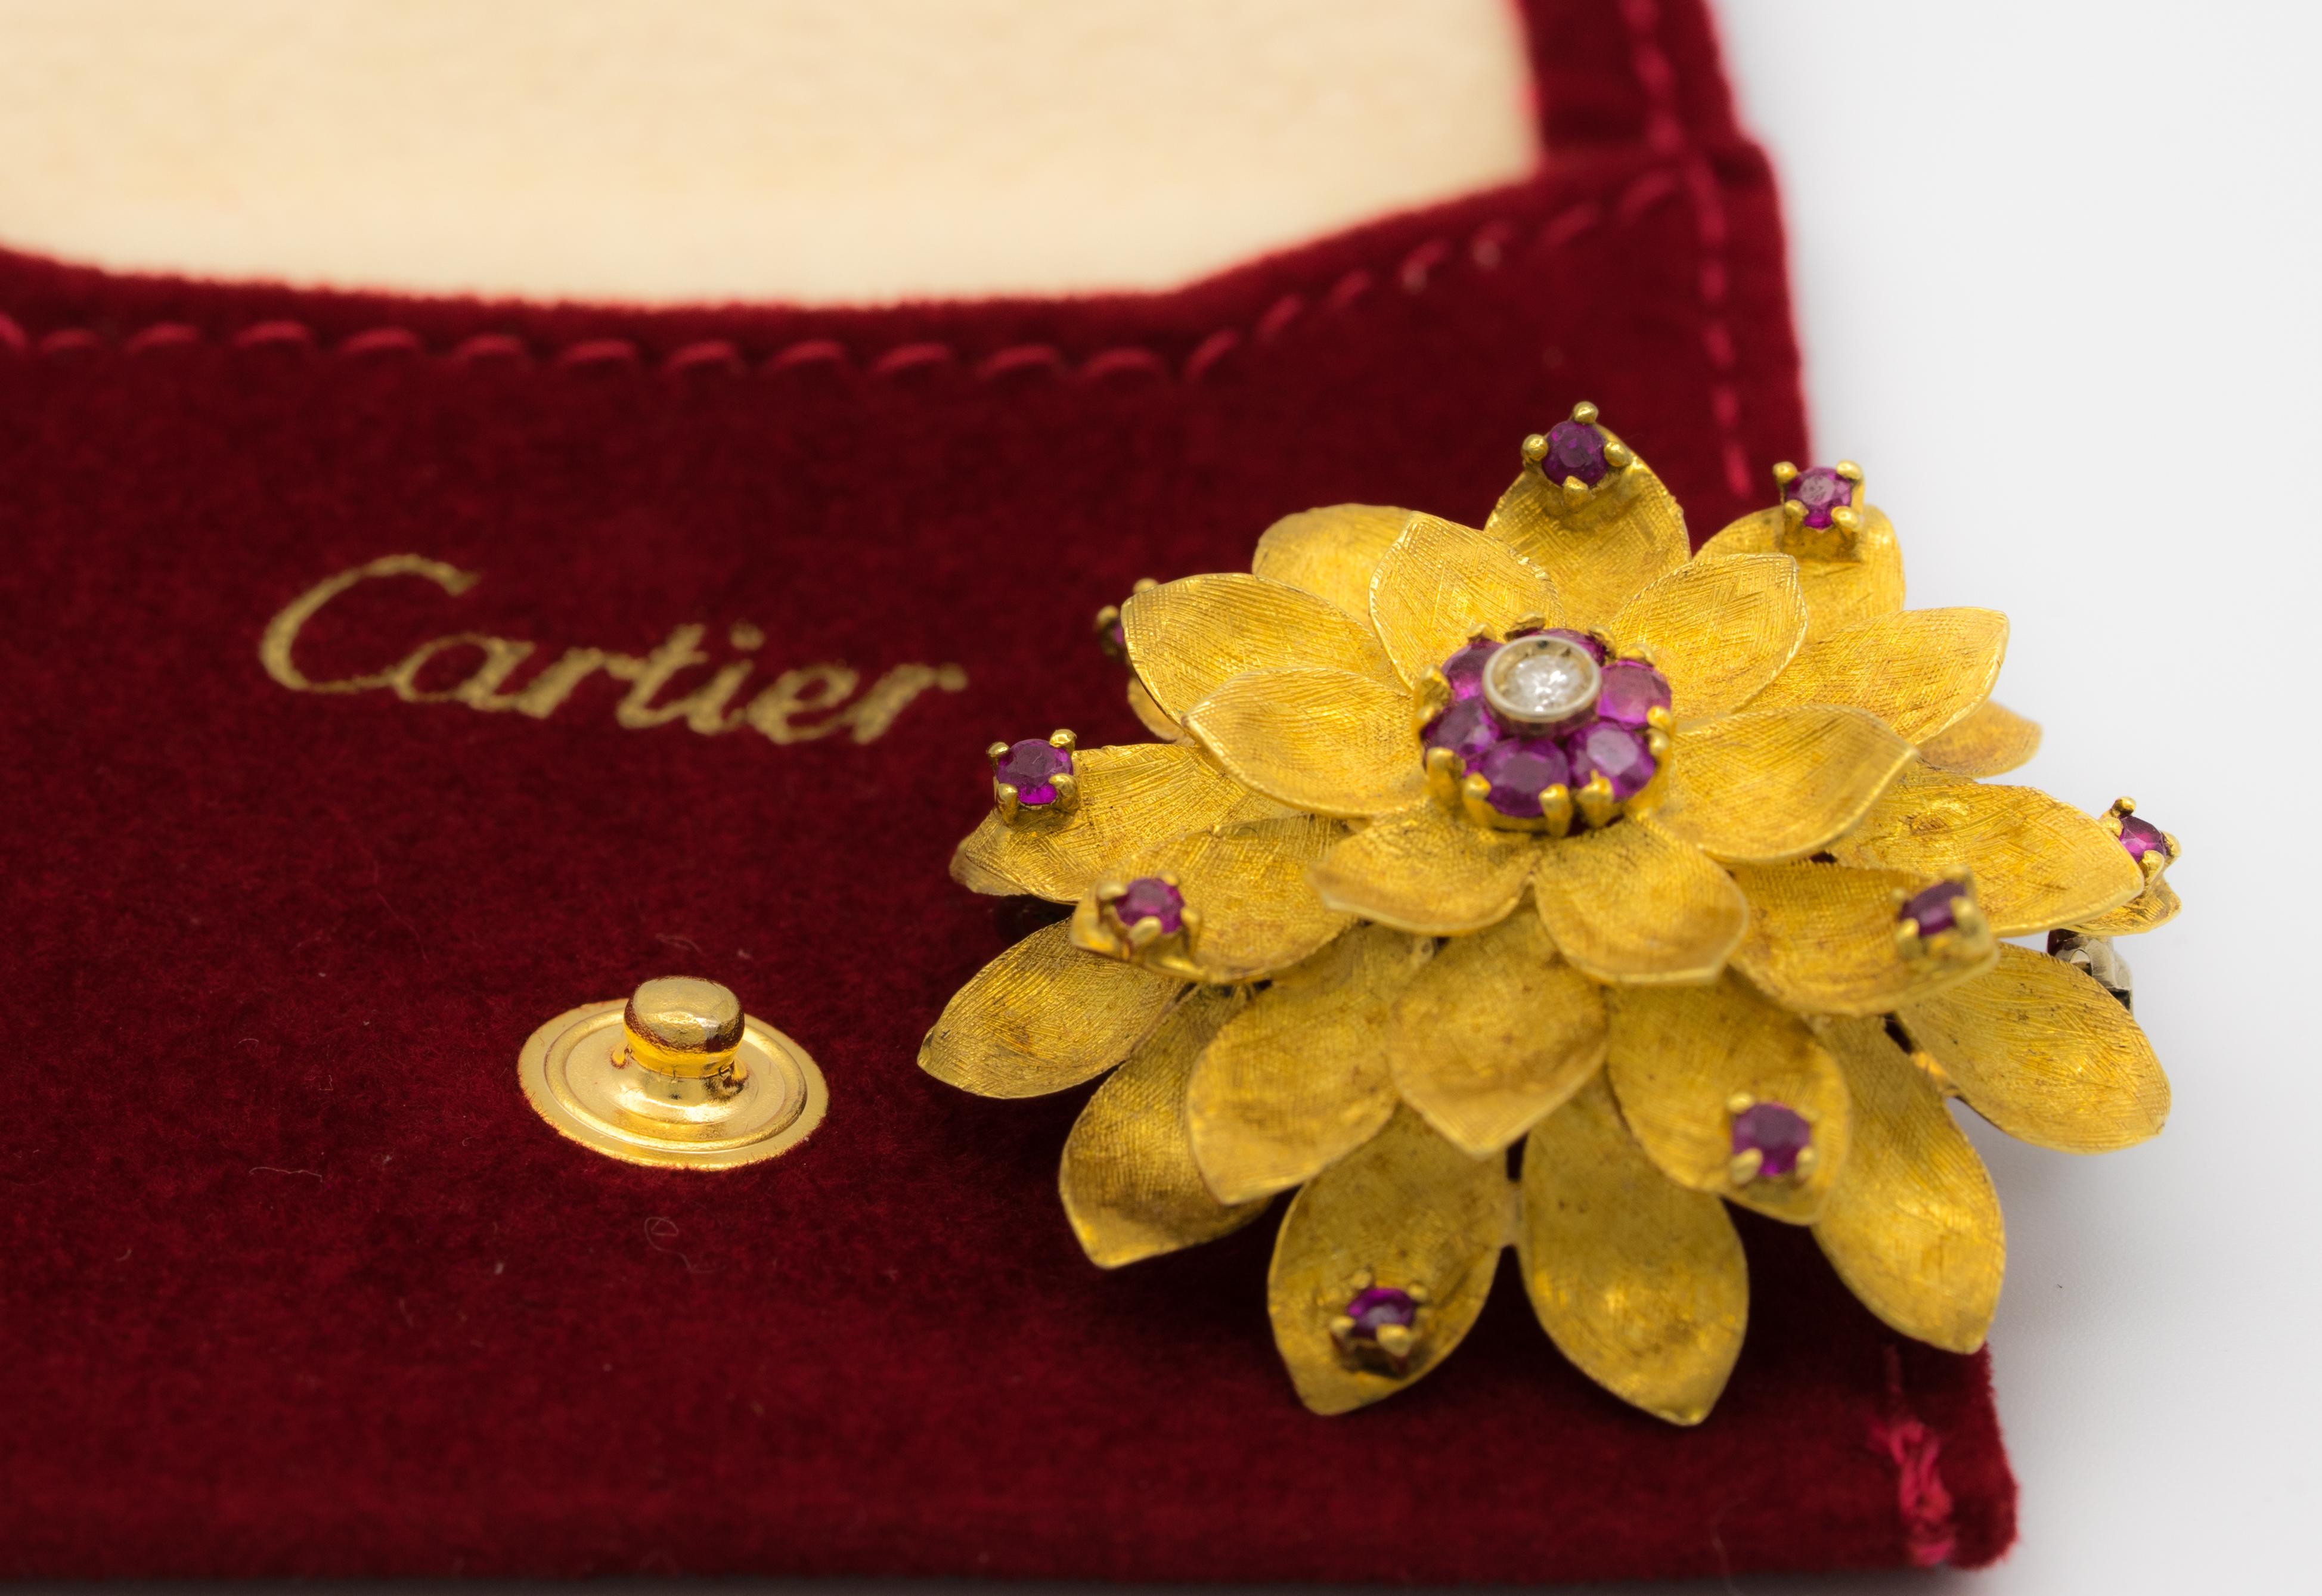 Vintage Cartier Gold, Ruby and Diamond Flower Brooch Circa 1950's in 18 kt gold.
Delicate textured leaves , 15 rubies and a diamond center create this exquisite graceful and gentle vintage Brooch from Cartier.  

Designer: Cartier 
Hallmarks: